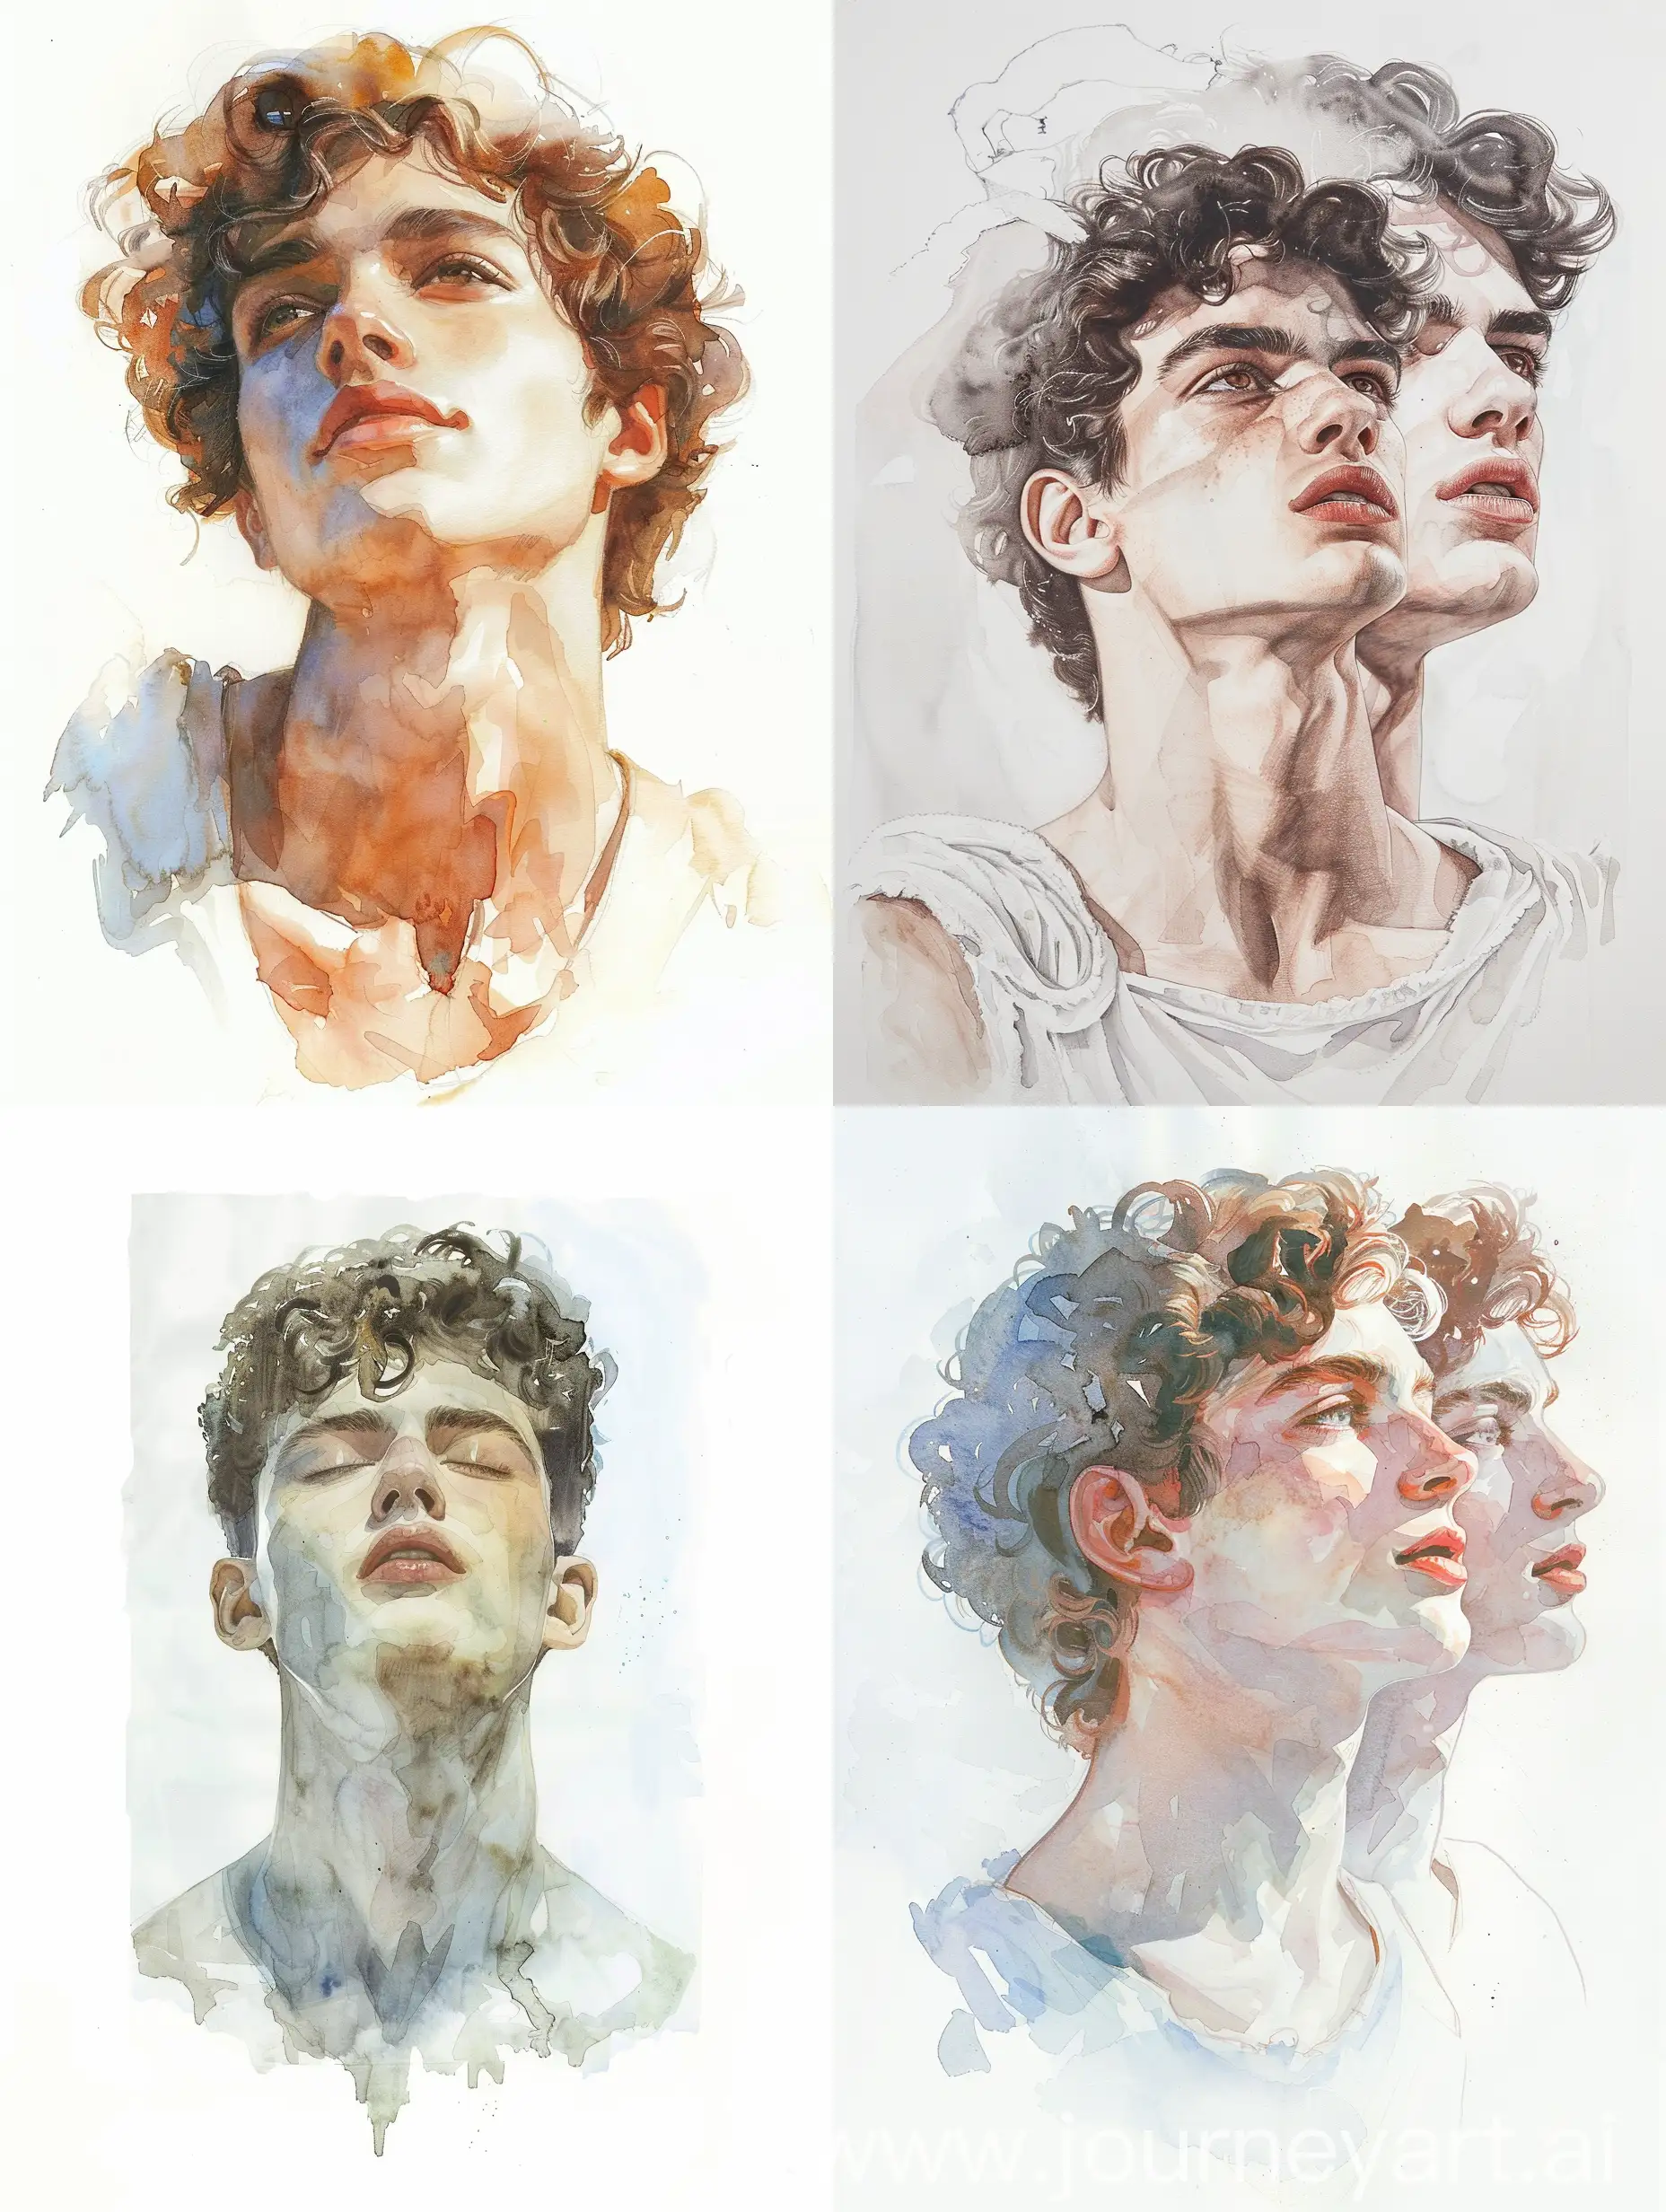 Watercolor painting technique - Very beautiful - White background - Creation of Adonis by Apollo - Very handsome 16 year old man as Adonis - Very attractive young man as Apollo